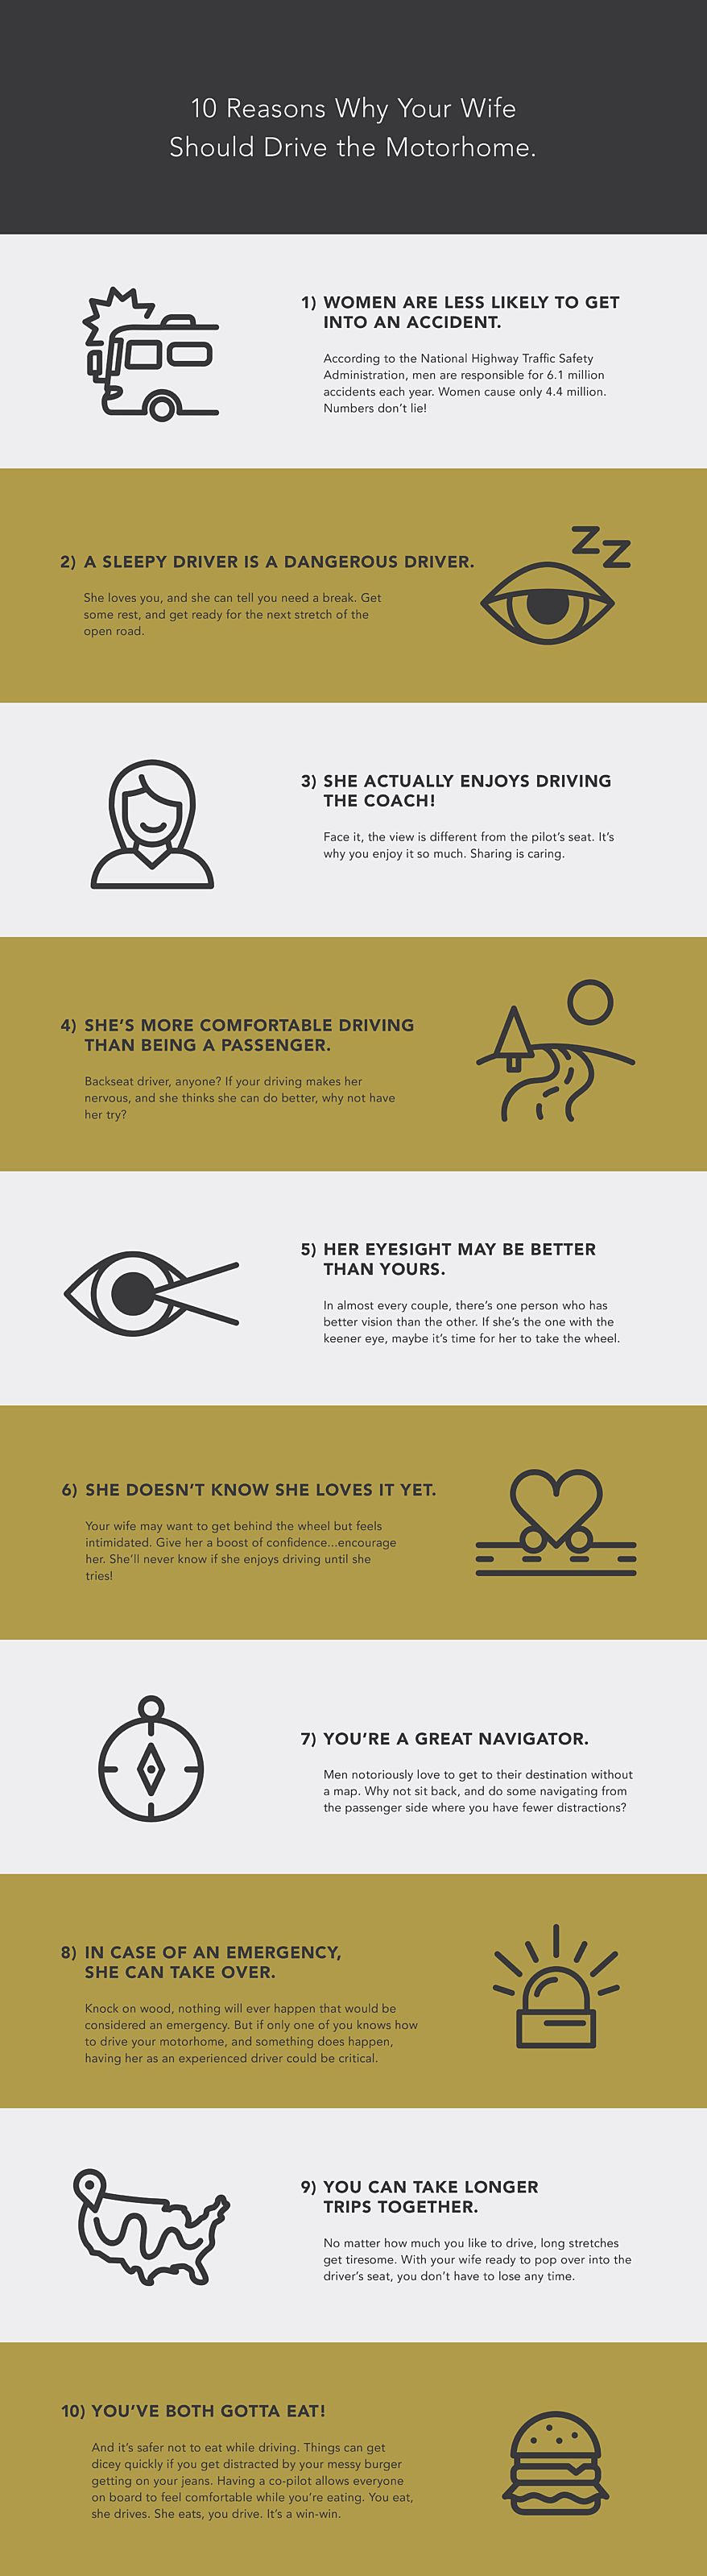 10 Reasons Infographic 1